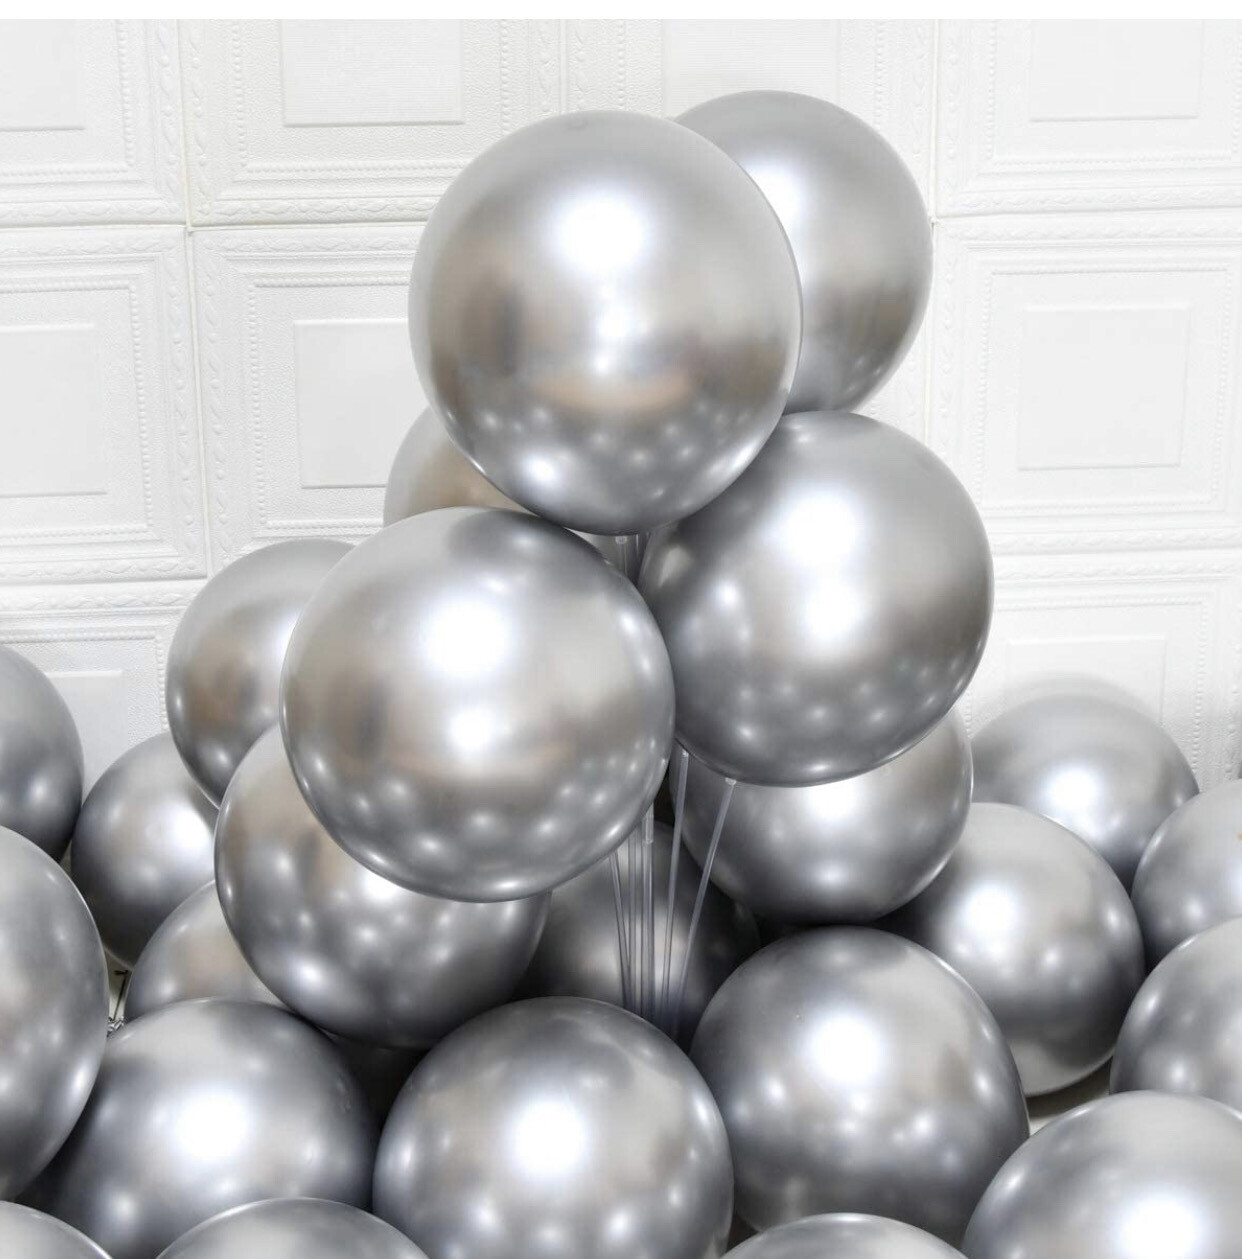 Balloons 50pcs pack Silver Latex Balloons for Valentine ,Wedding Graduation Baby Shower Birthday Party Decorations